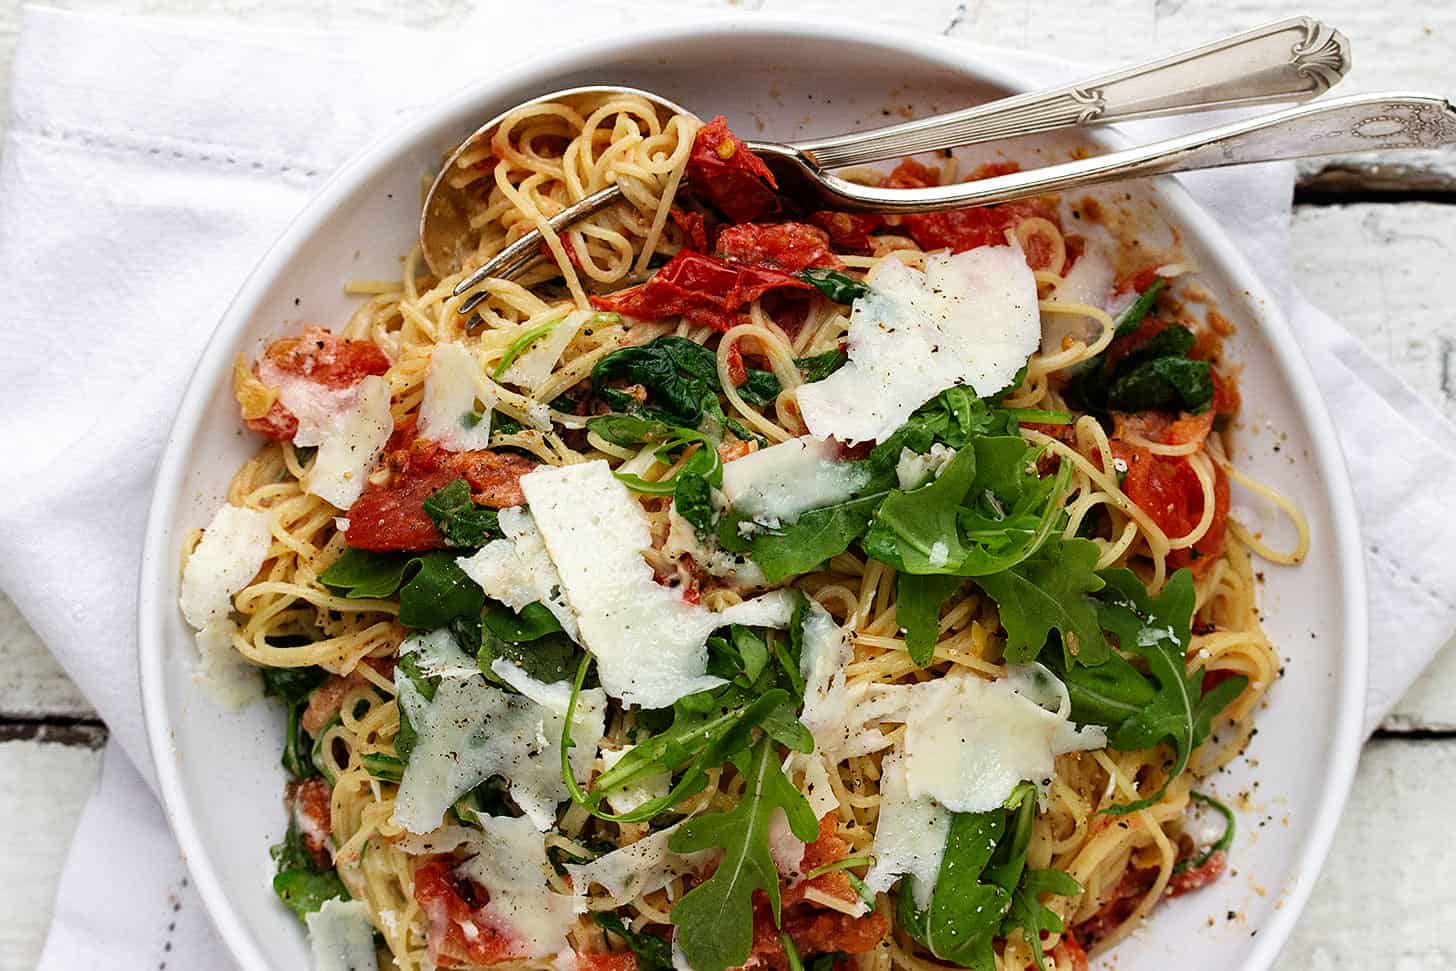 blistered tomato pasta in bowl with forks